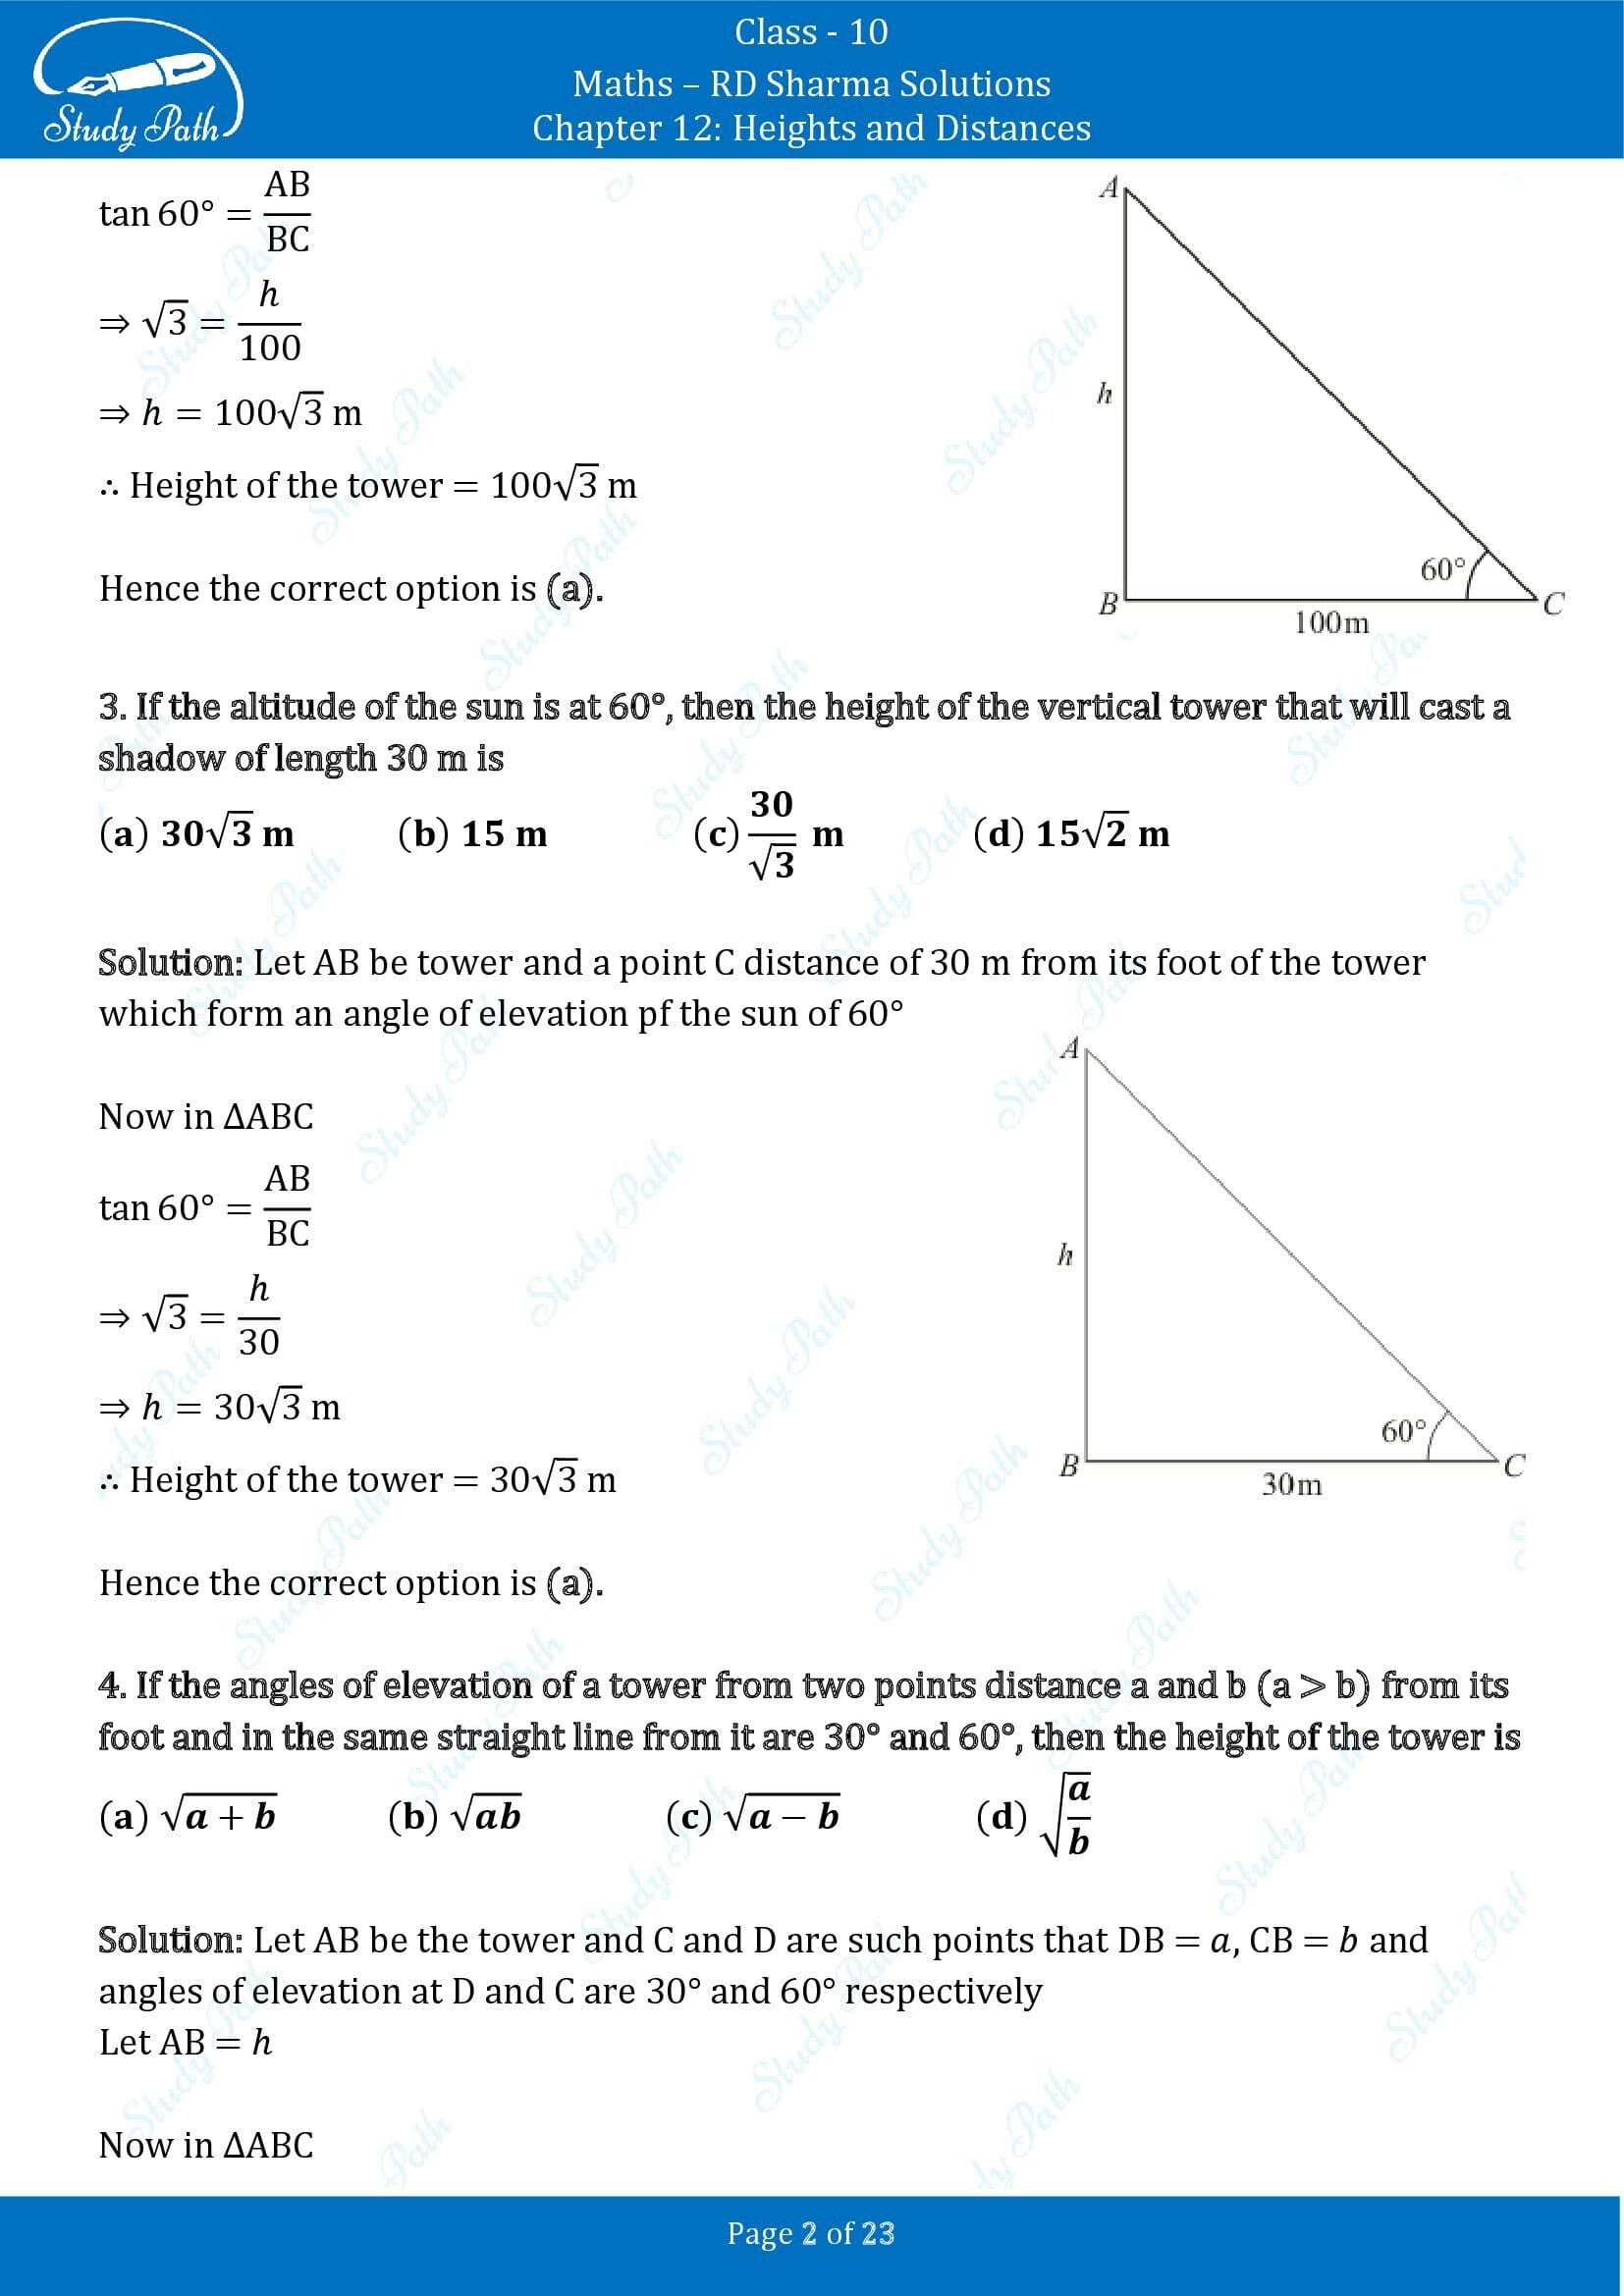 RD Sharma Solutions Class 10 Chapter 12 Heights and Distances Multiple Choice Question MCQs 00002